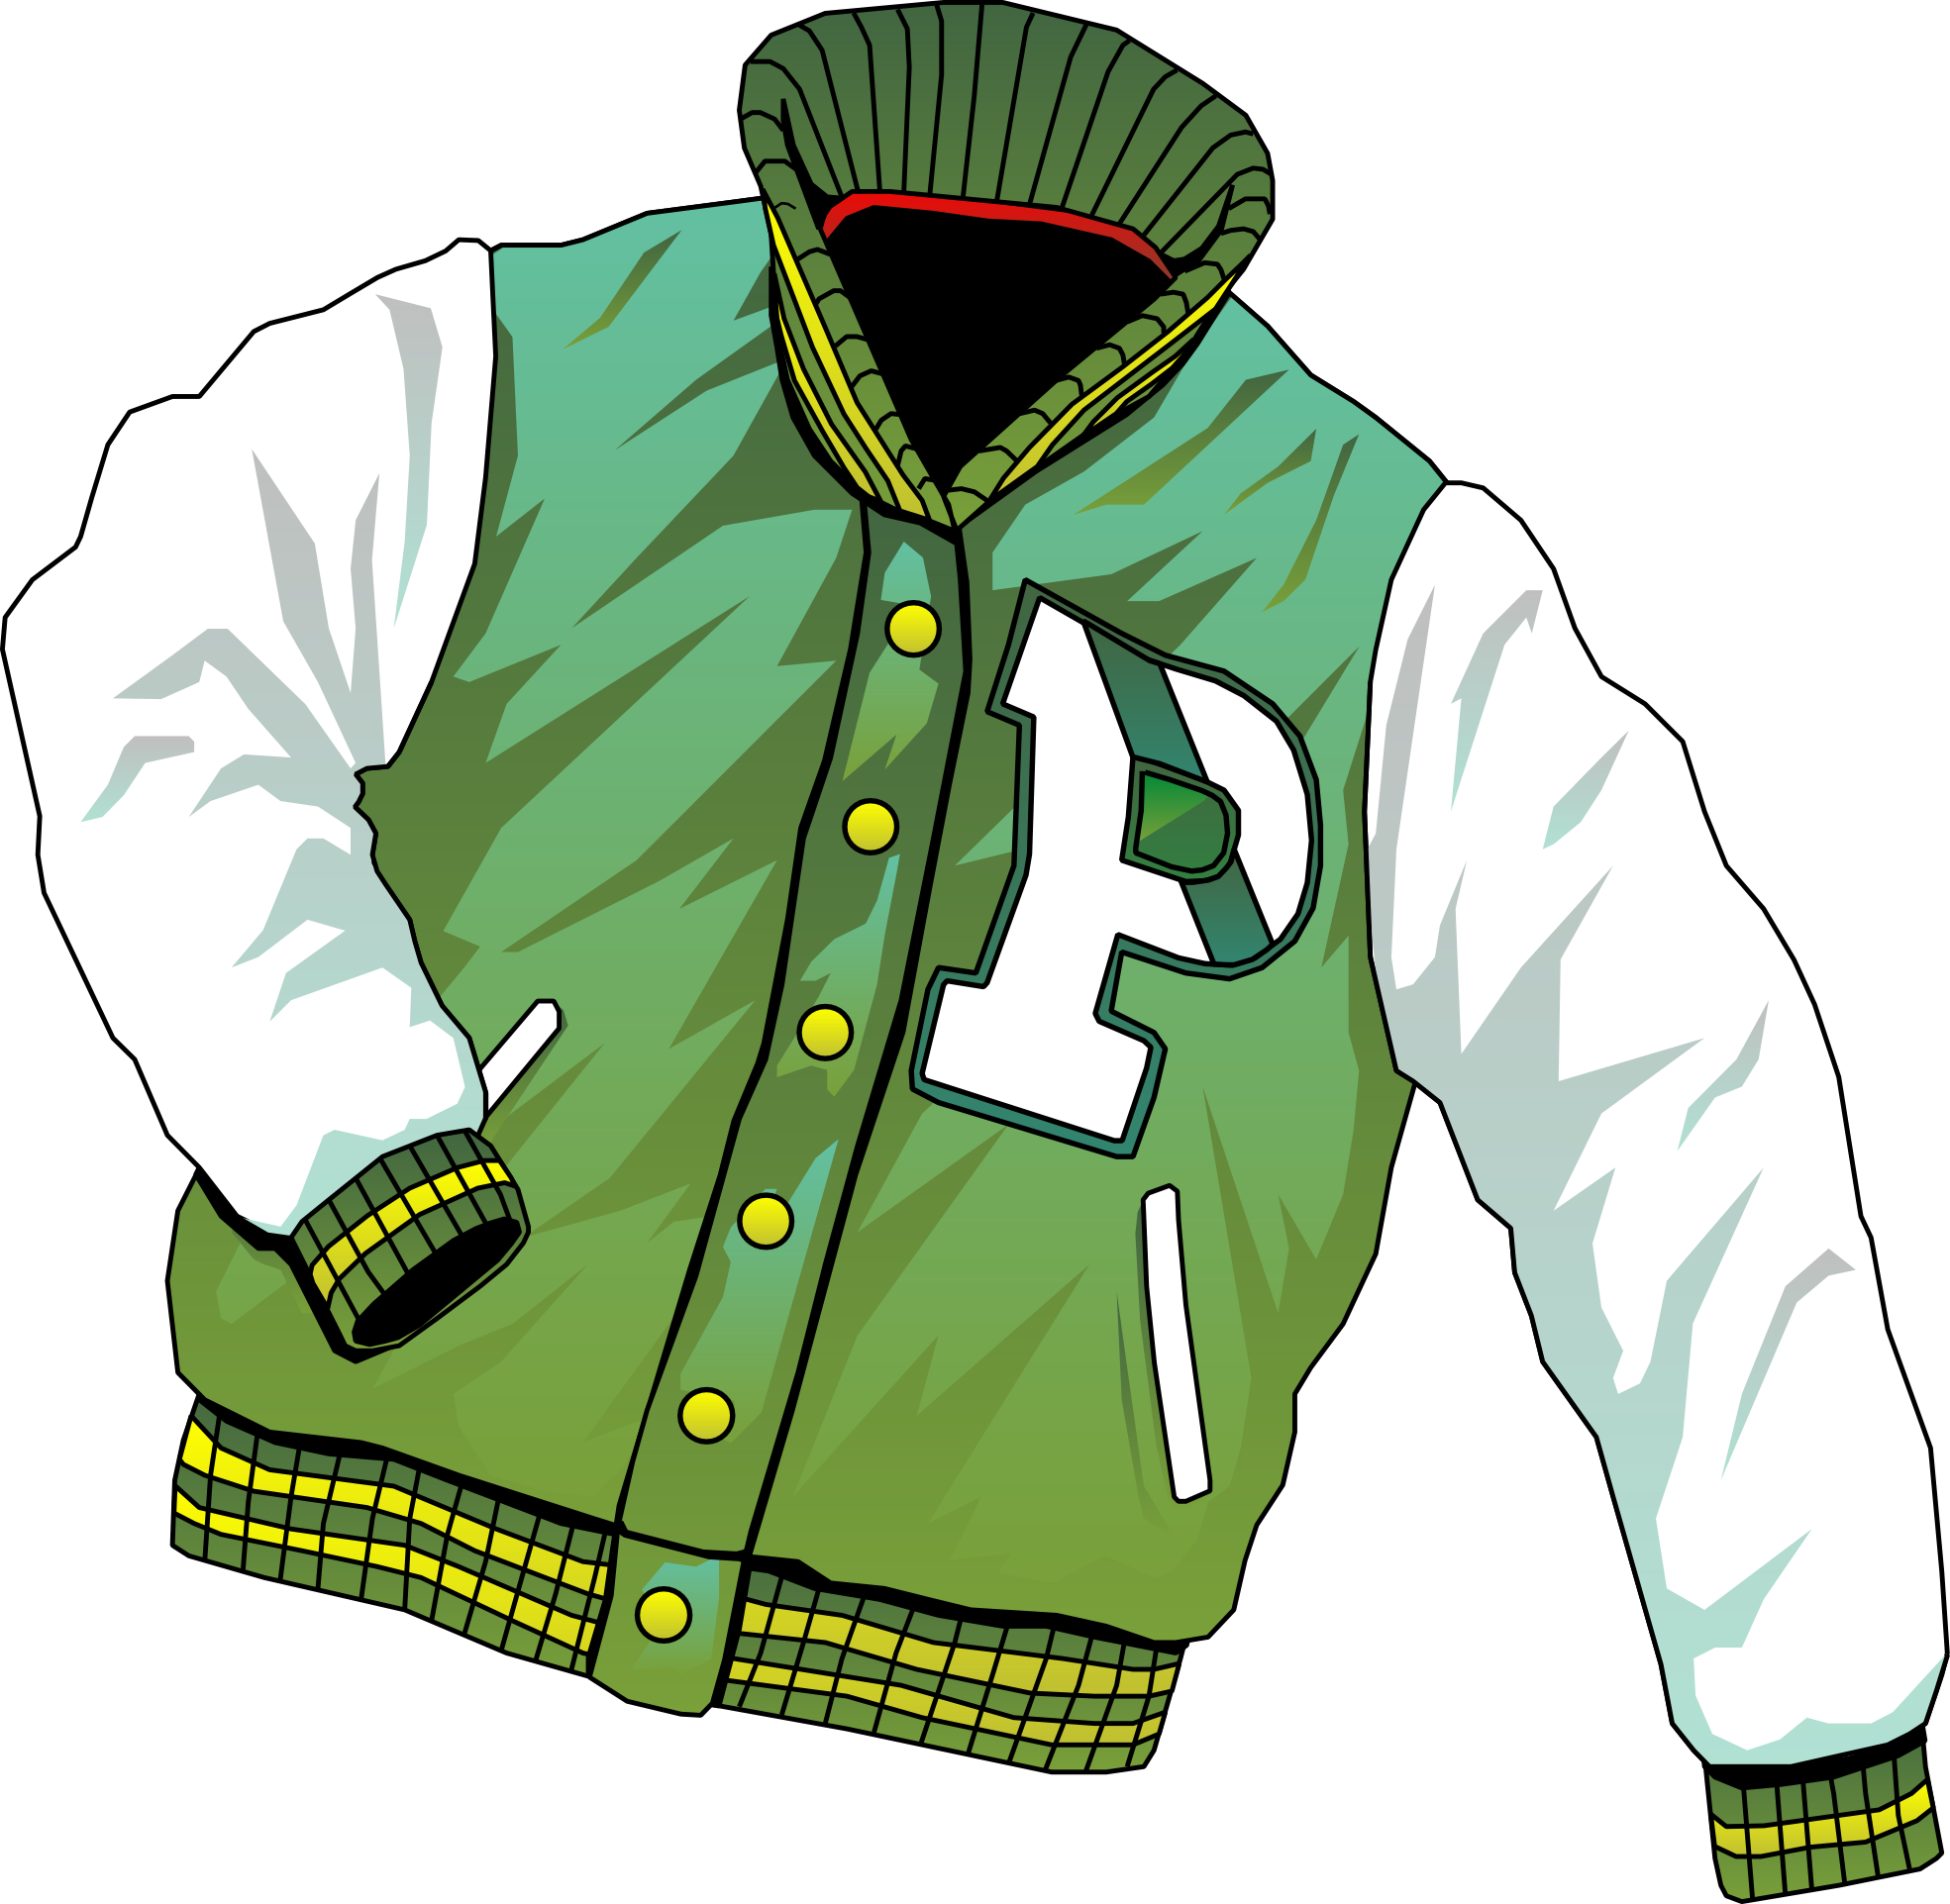 Colorful cartoon jacket clipart free image download